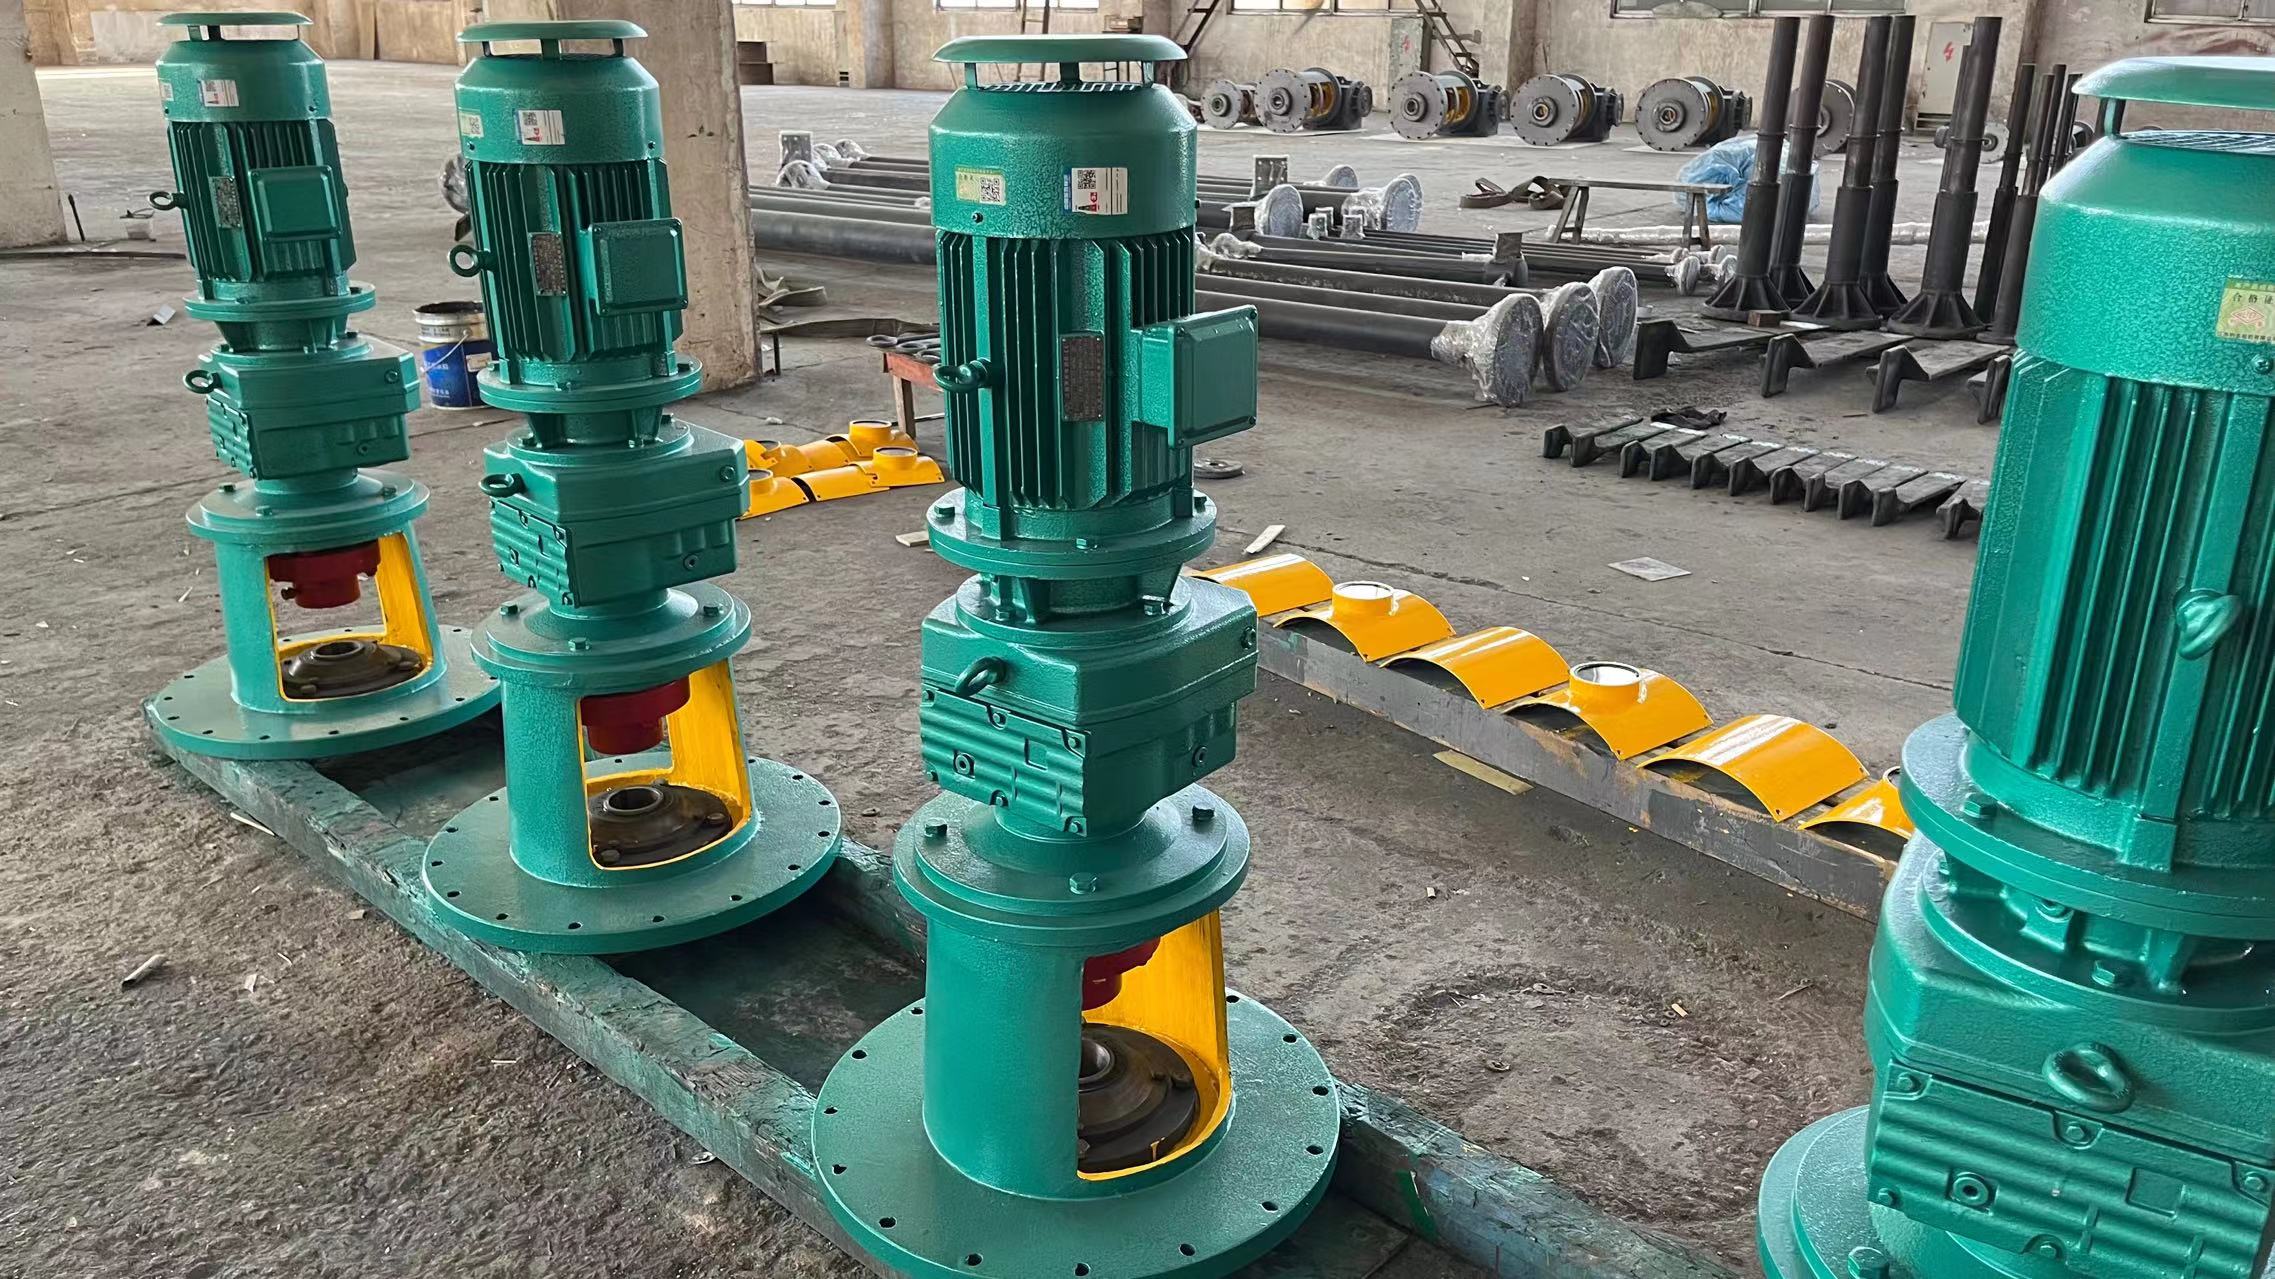 Top entry mixer agitator for size 6*4.5 Sulfur tank 